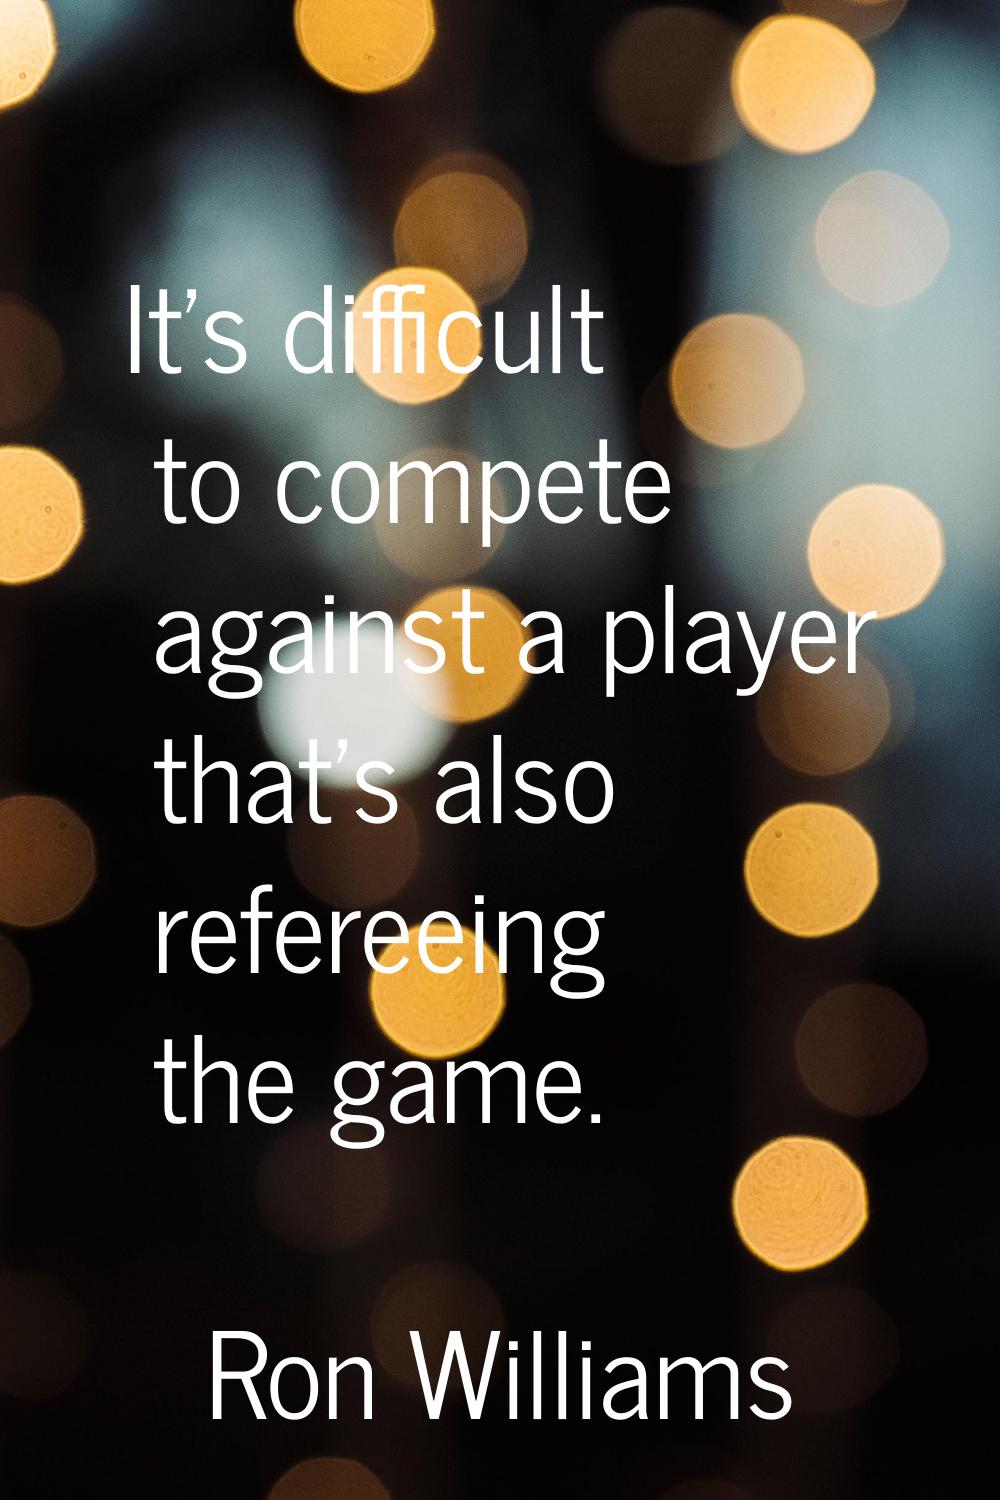 It's difficult to compete against a player that's also refereeing the game.